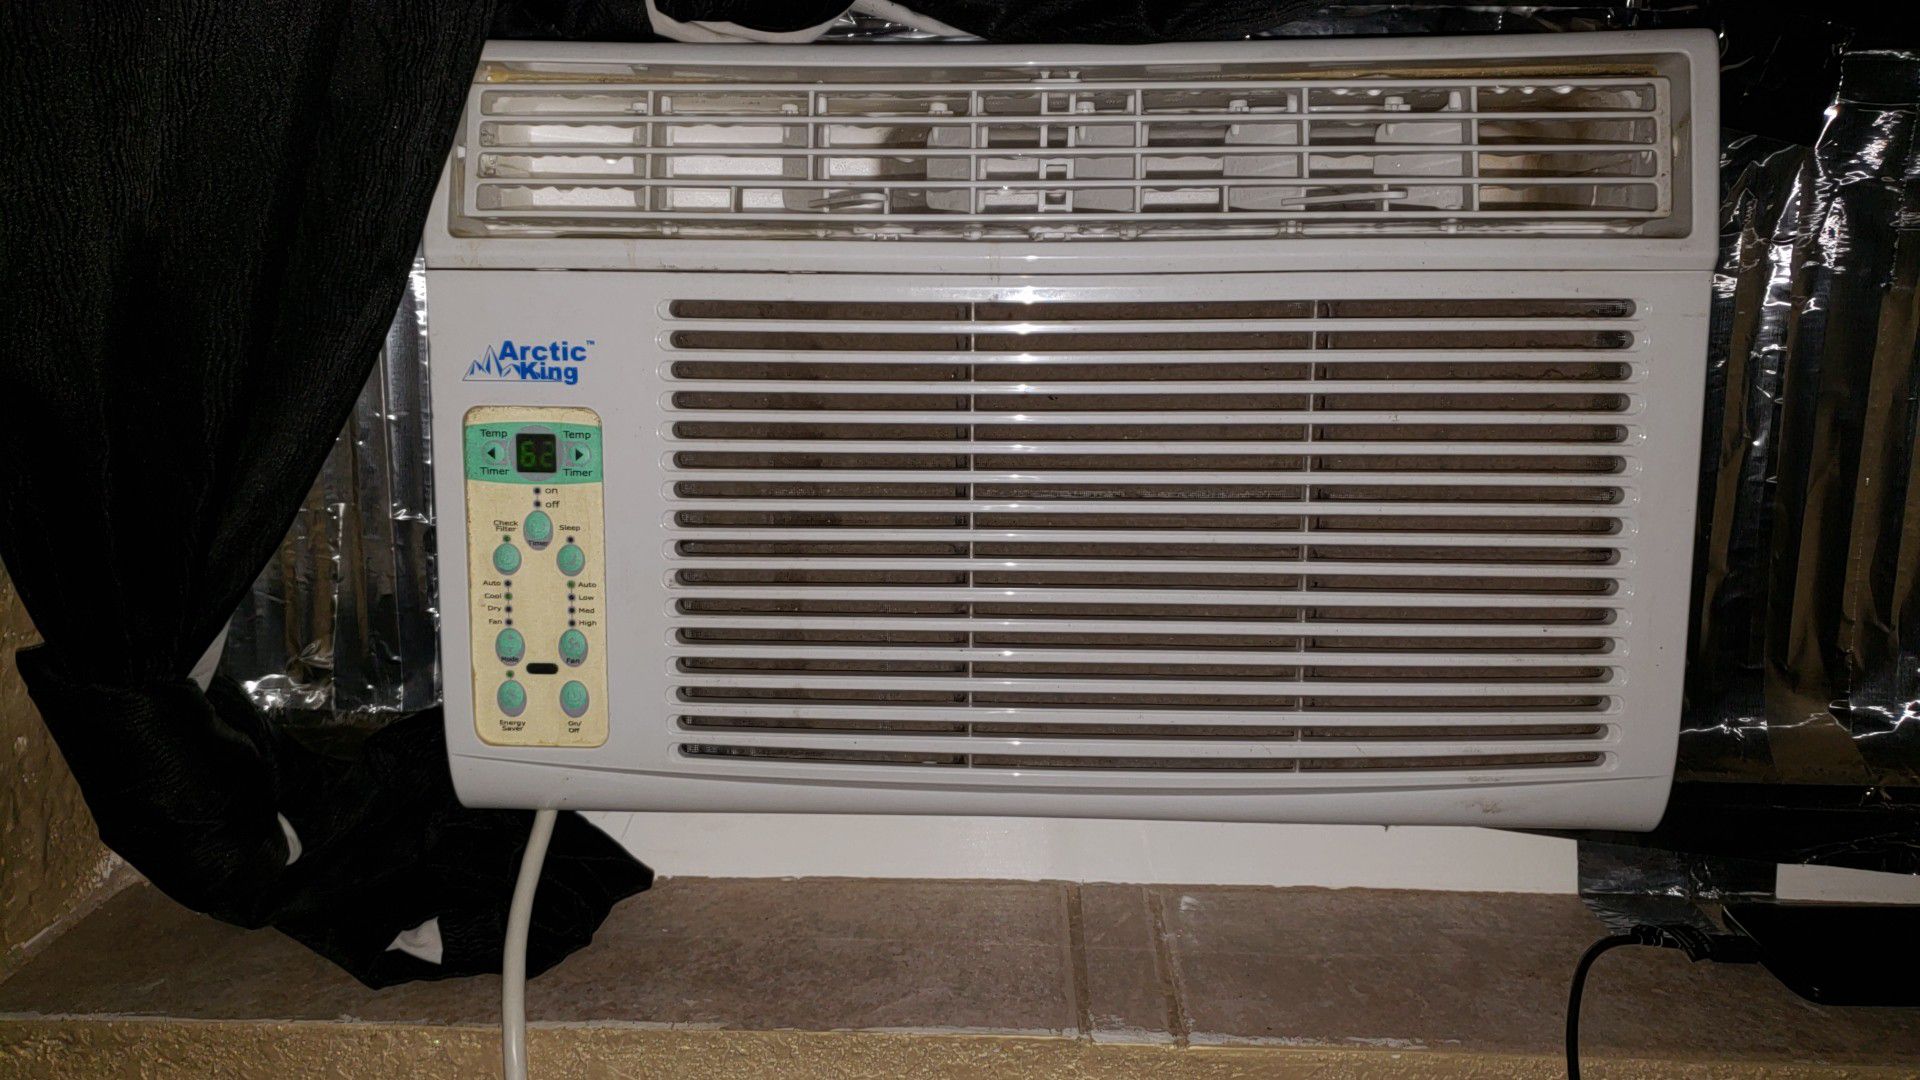 Arctic king window ac 6000 btu... about 7 months old